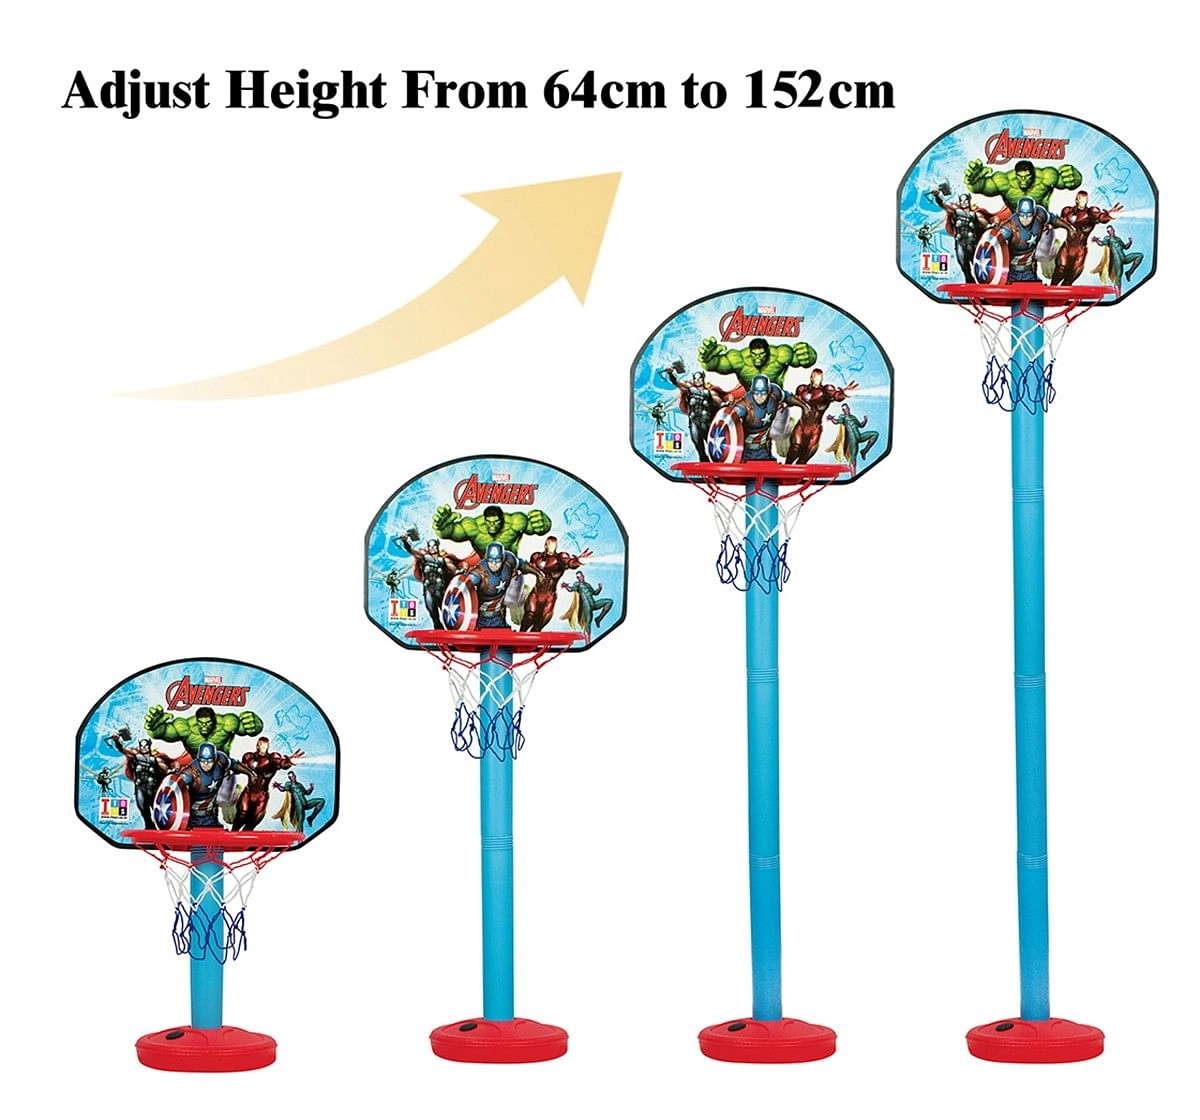 IToys Marvel Avengers shooting champ basket ball set, standing basket ball for growing kids,  3Y+(Multicolour)